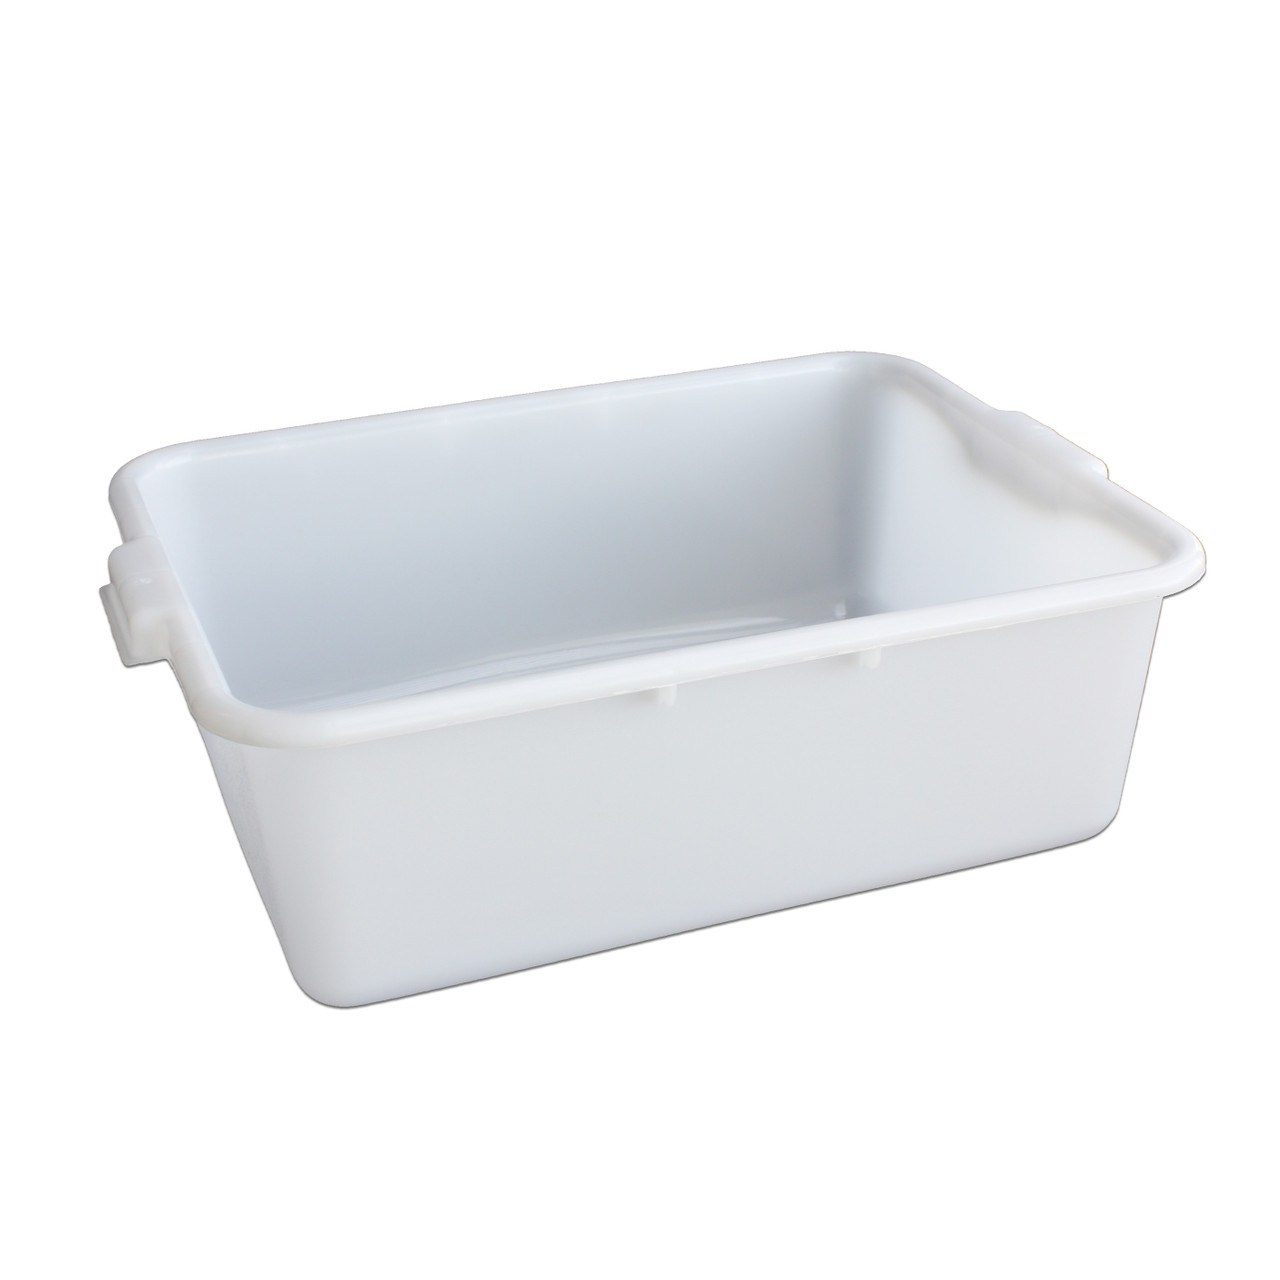 Secondary Container for 20 Liter Rectangular Container, SC-30020